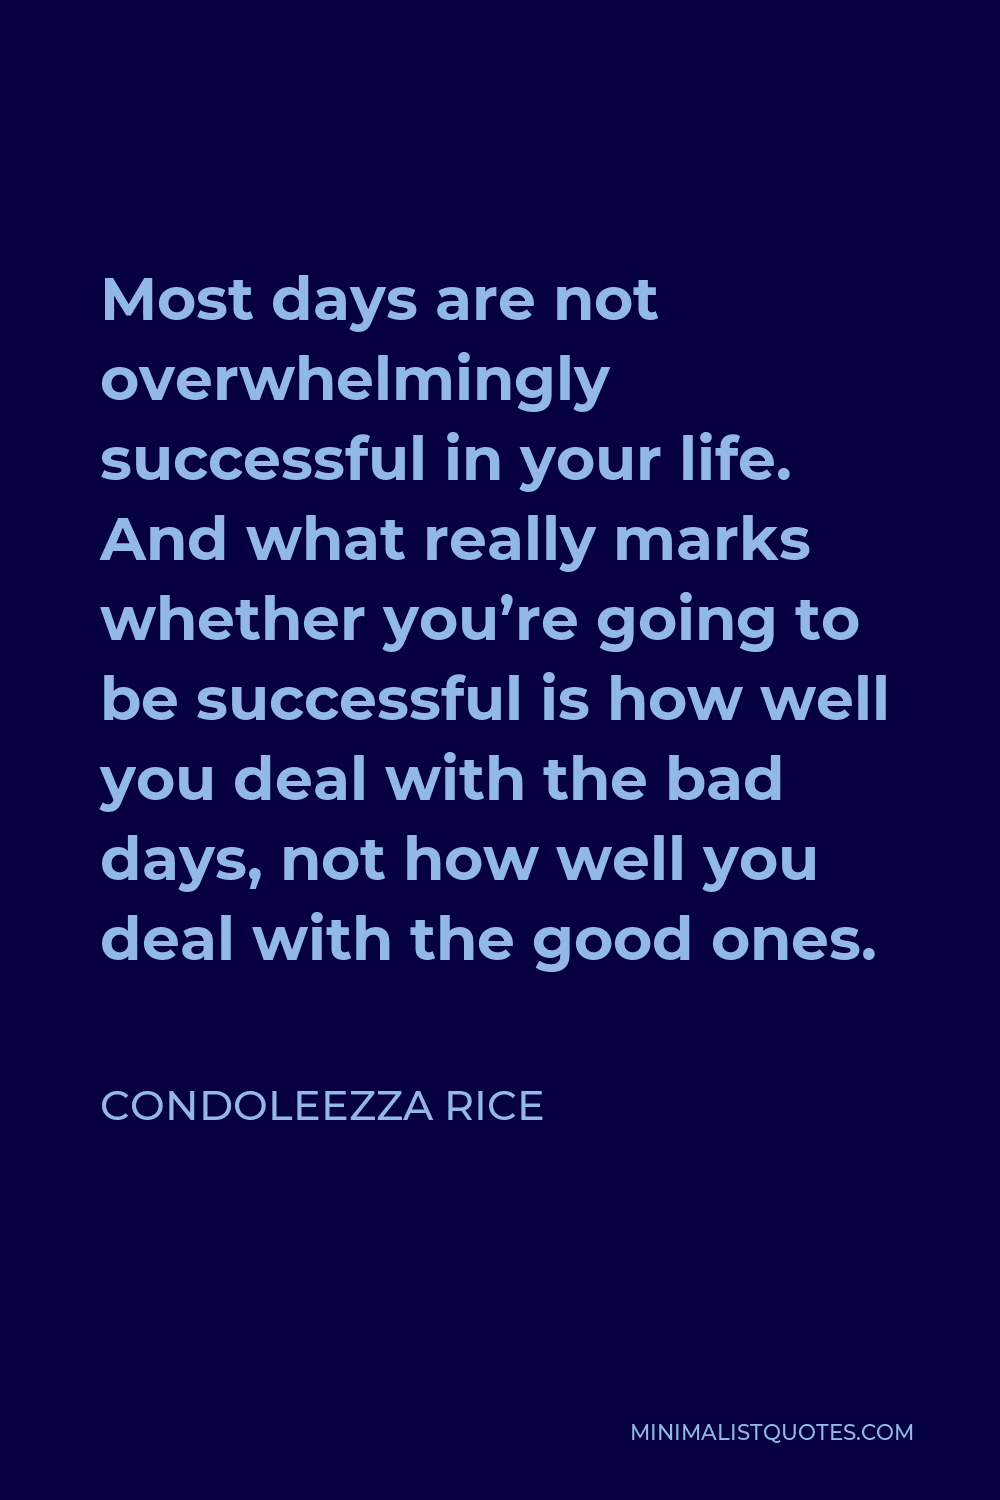 Condoleezza Rice Quote - Most days are not overwhelmingly successful in your life. And what really marks whether you’re going to be successful is how well you deal with the bad days, not how well you deal with the good ones.